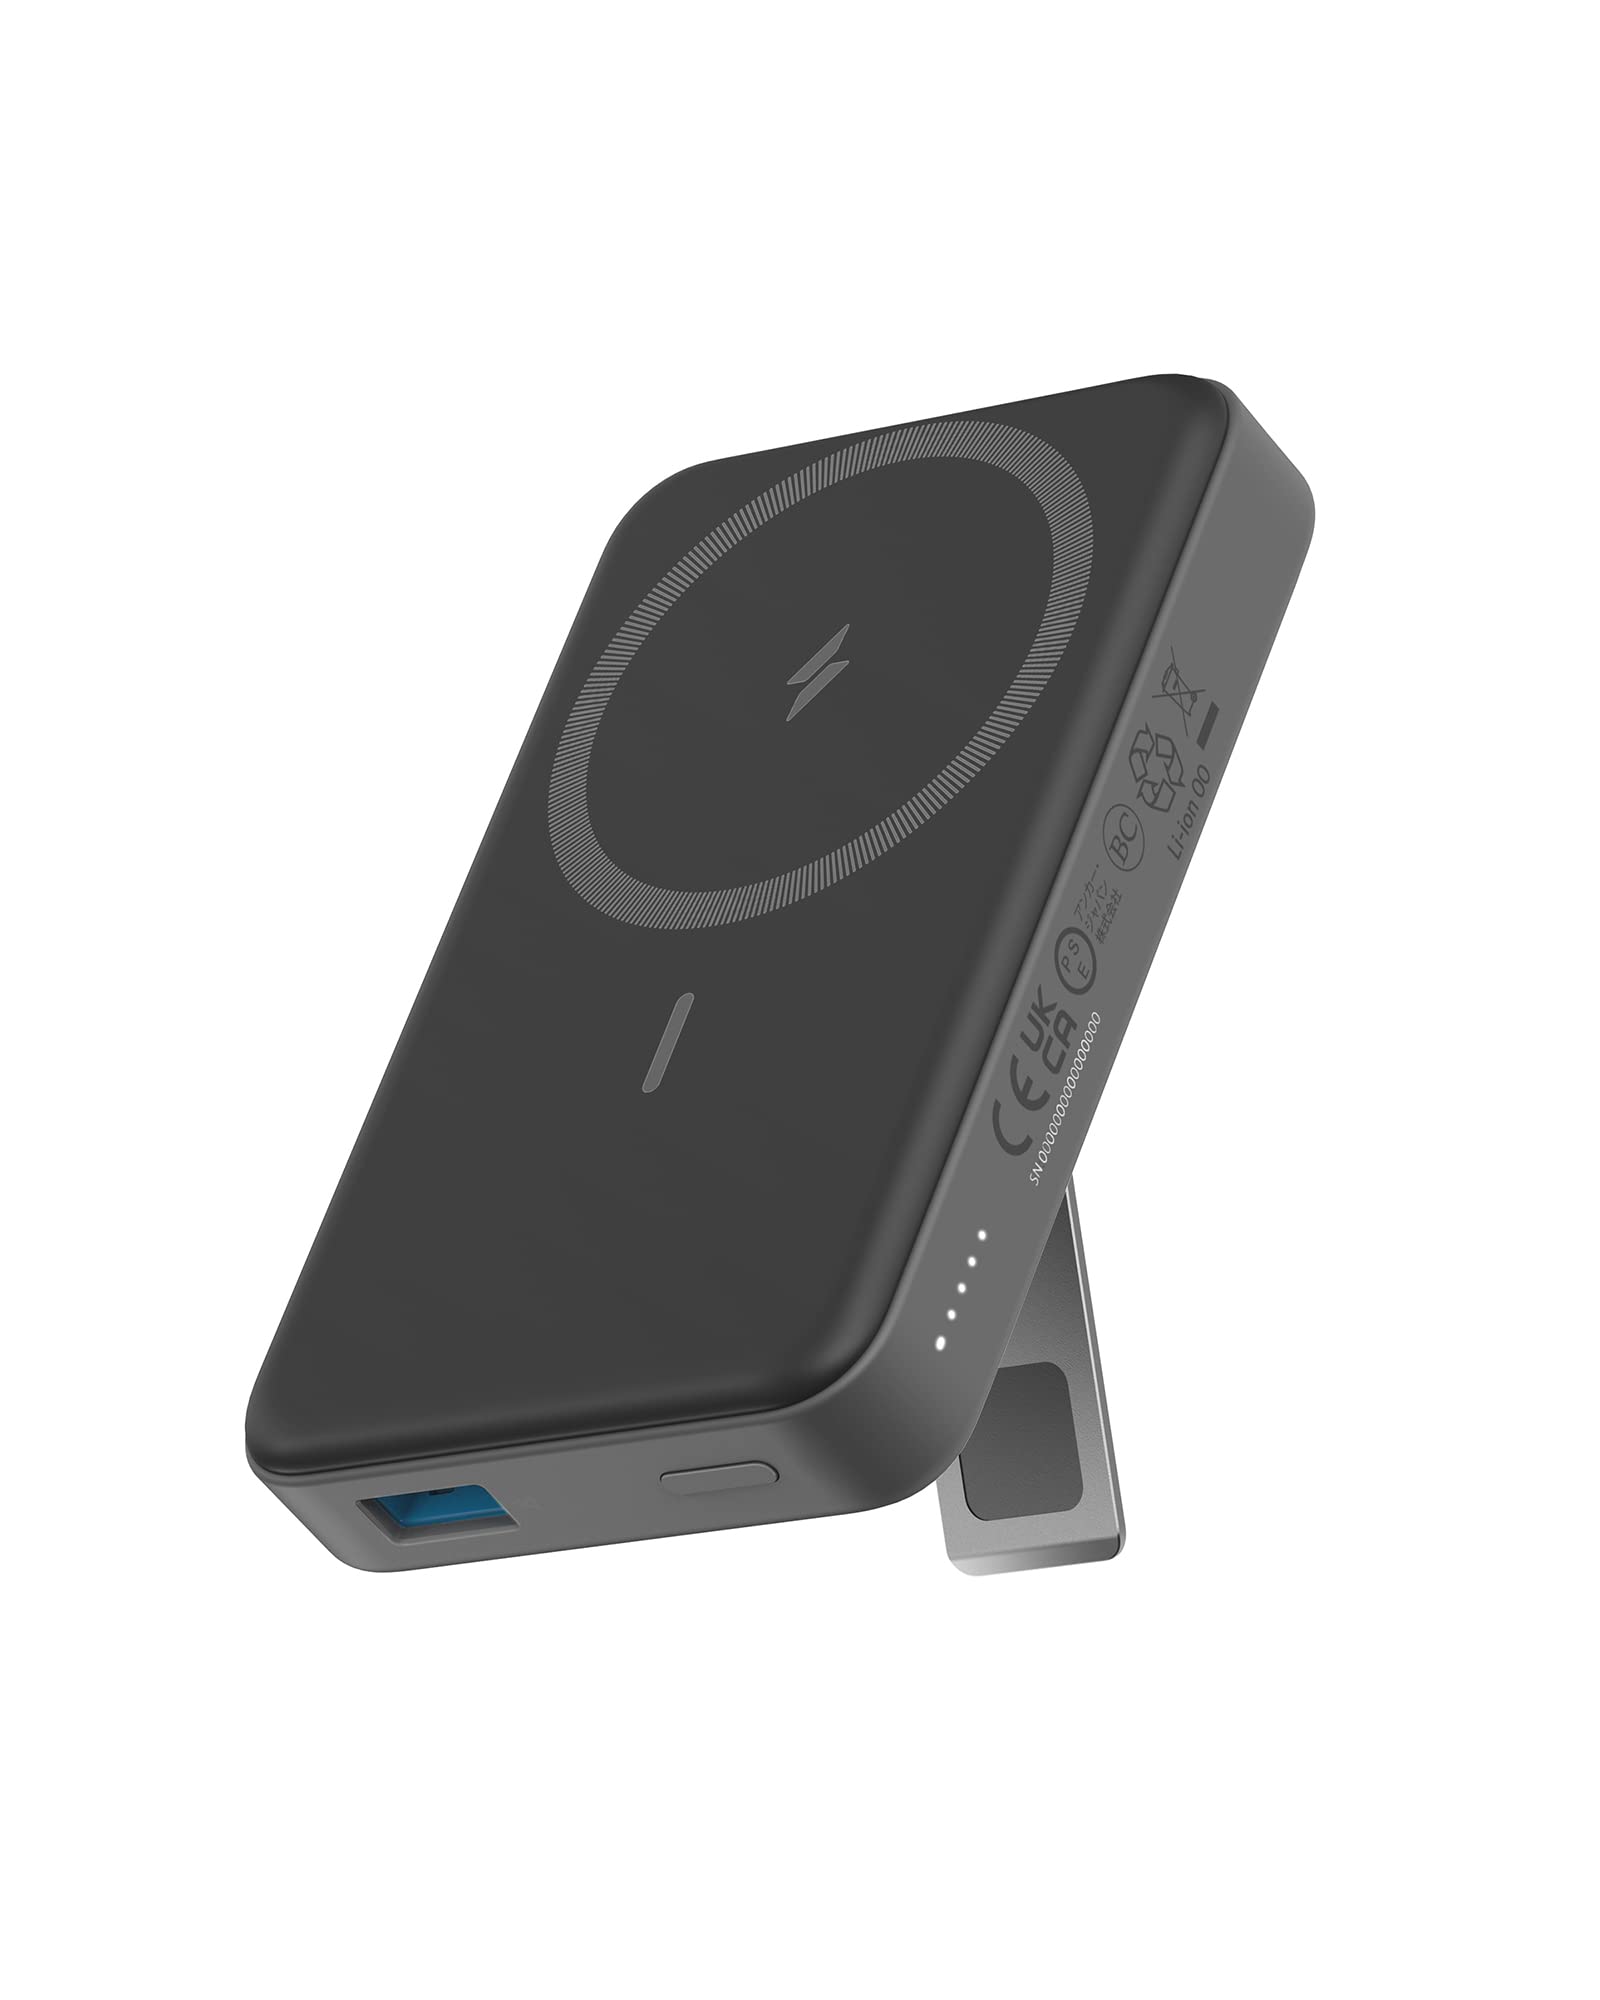 Prime Members: 10,000mAh Anker 633 Magnetic Battery (MagGo) Portable Charger w/ Stand (Black) + 2' USB-C Charging Cable $44 & More + Free Shipping